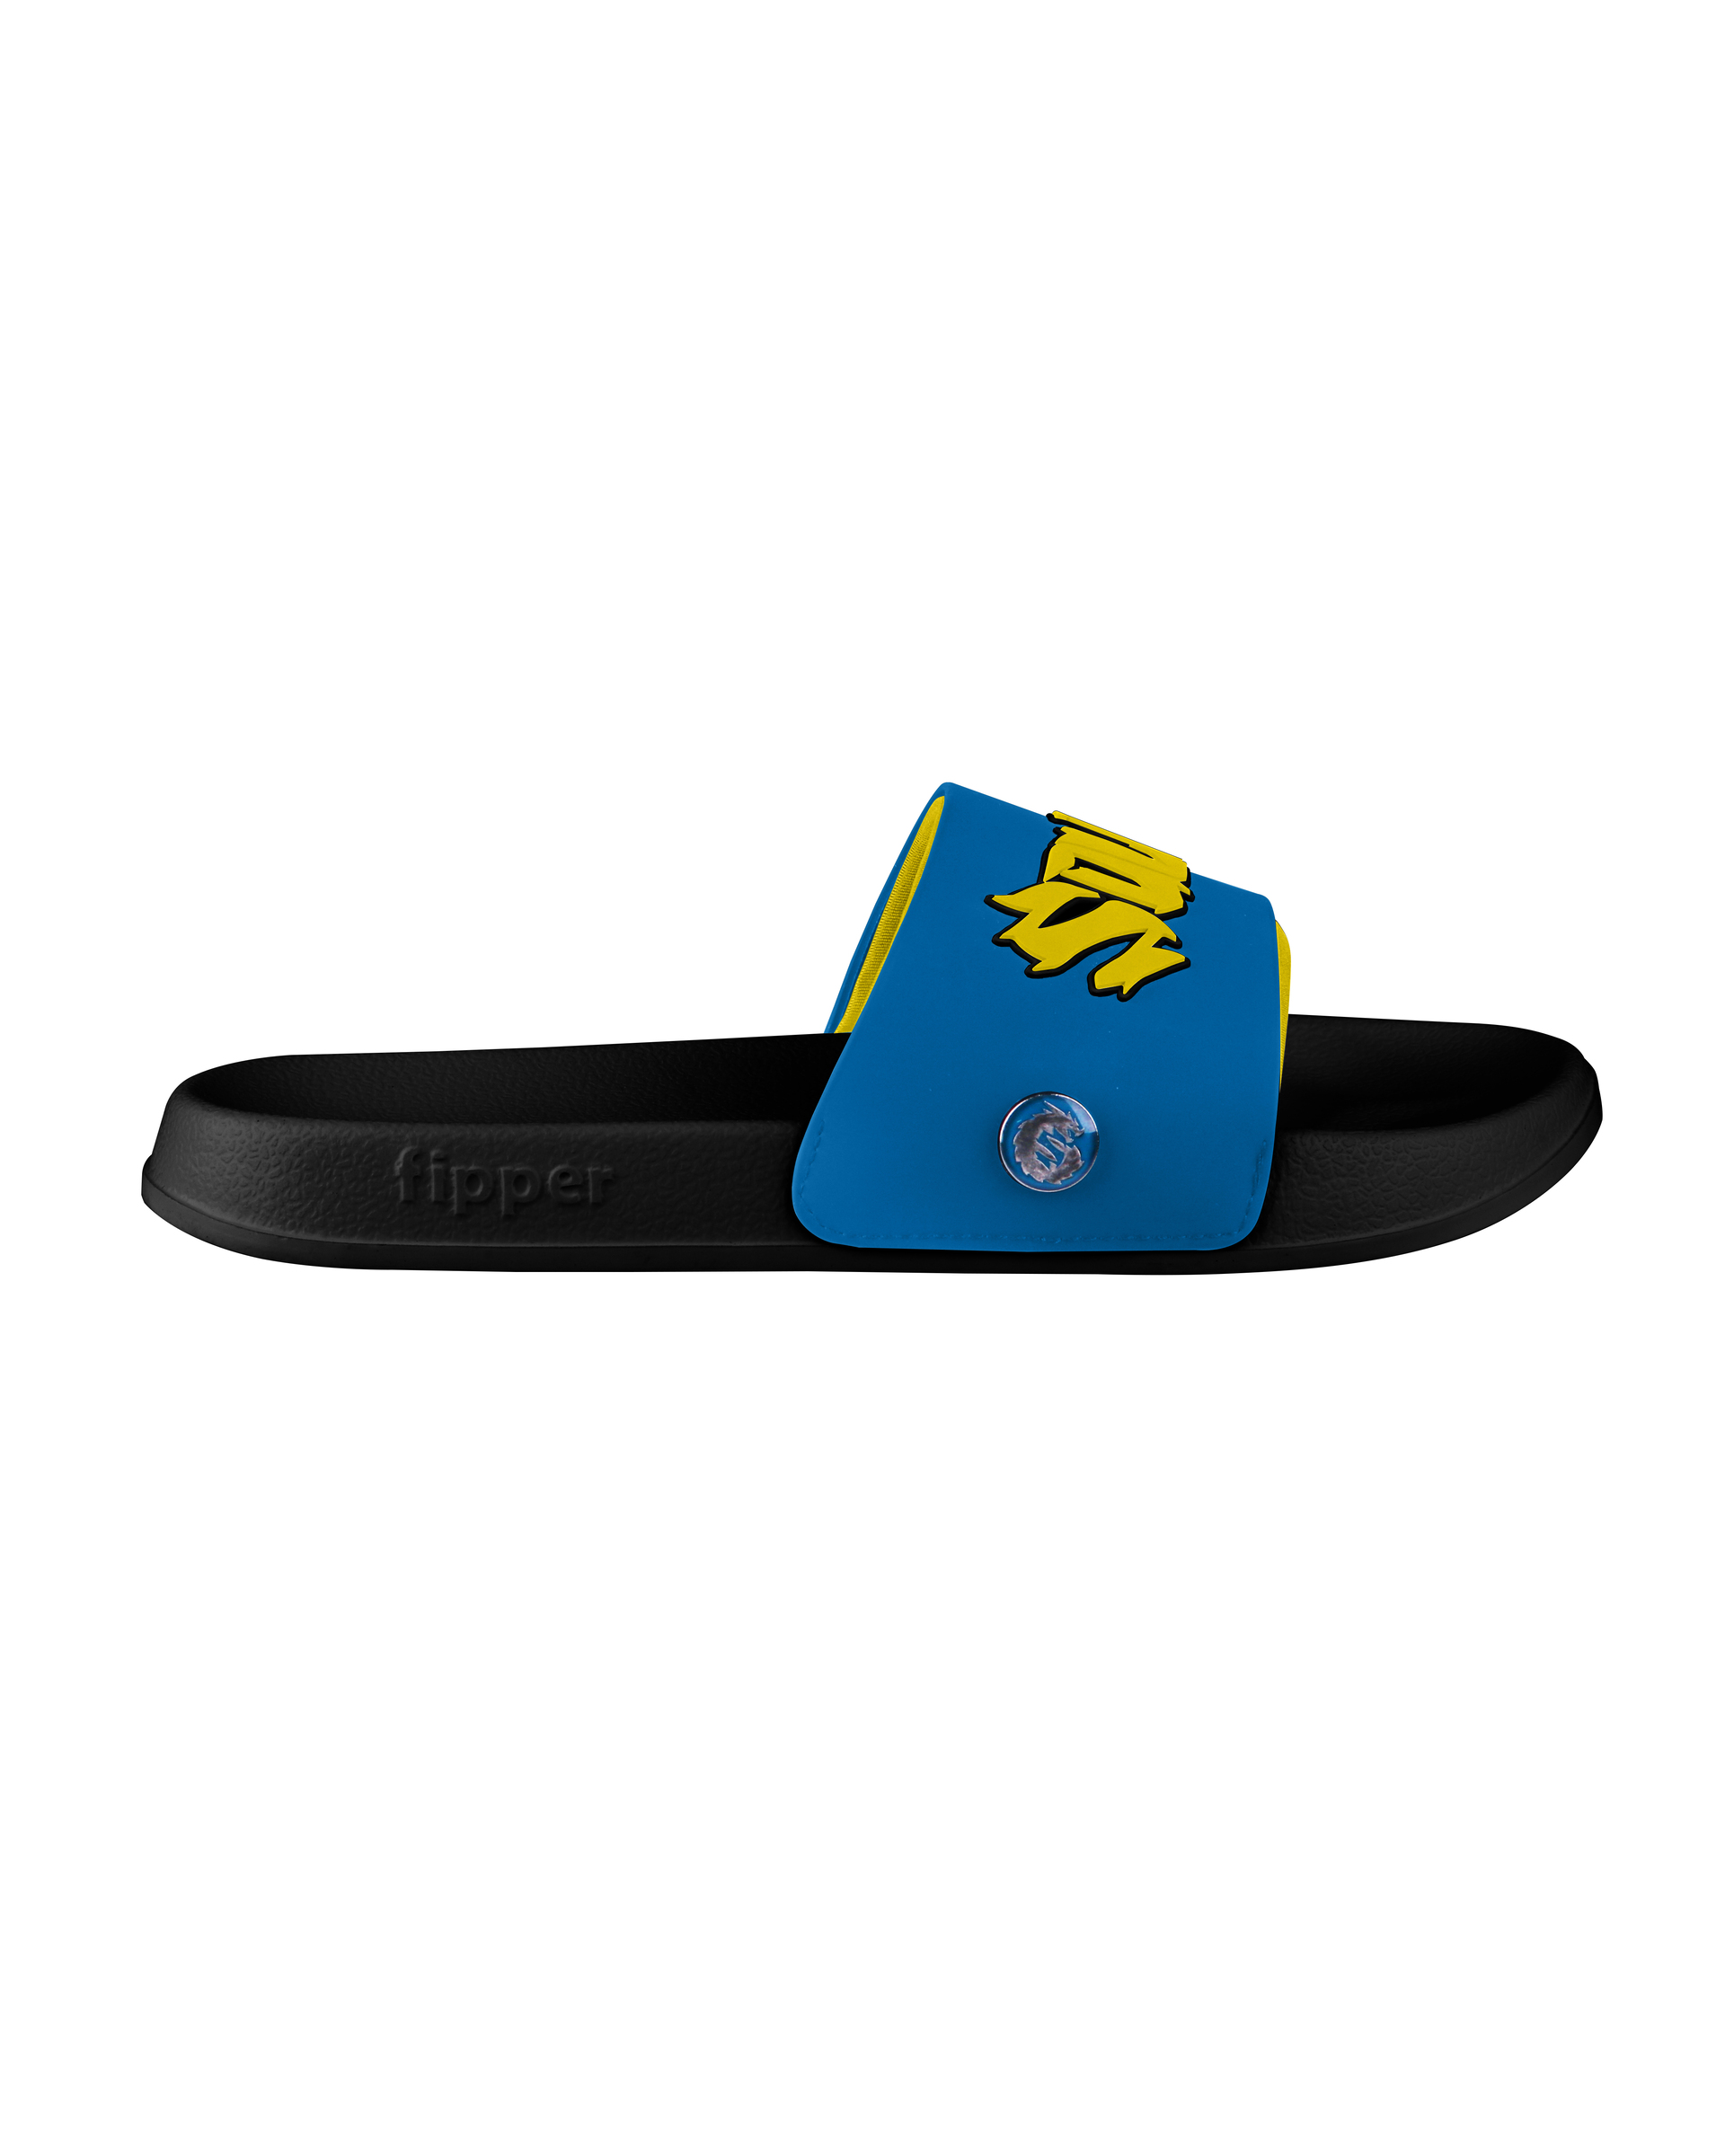 Fipper X Soloz Limited Edition Slip On in Black / Blue (Snorkel) / Yellow + Exclusive Drawstring Bag